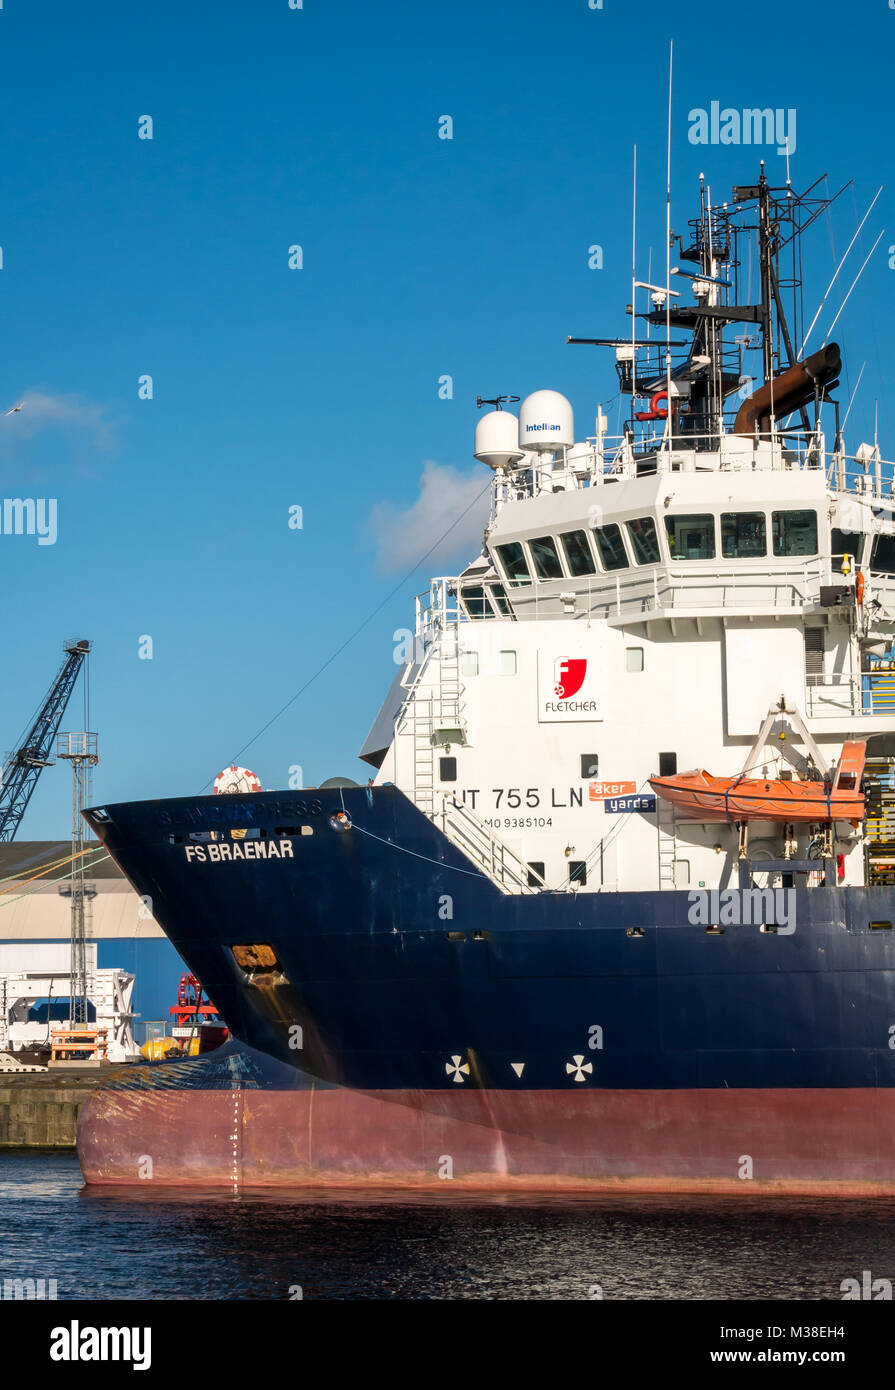 FS Braemar, offshore supply ship, Leith Dock, Edinburgh, Scotland, UK, with bulbous bow and lifeboat Stock Photo